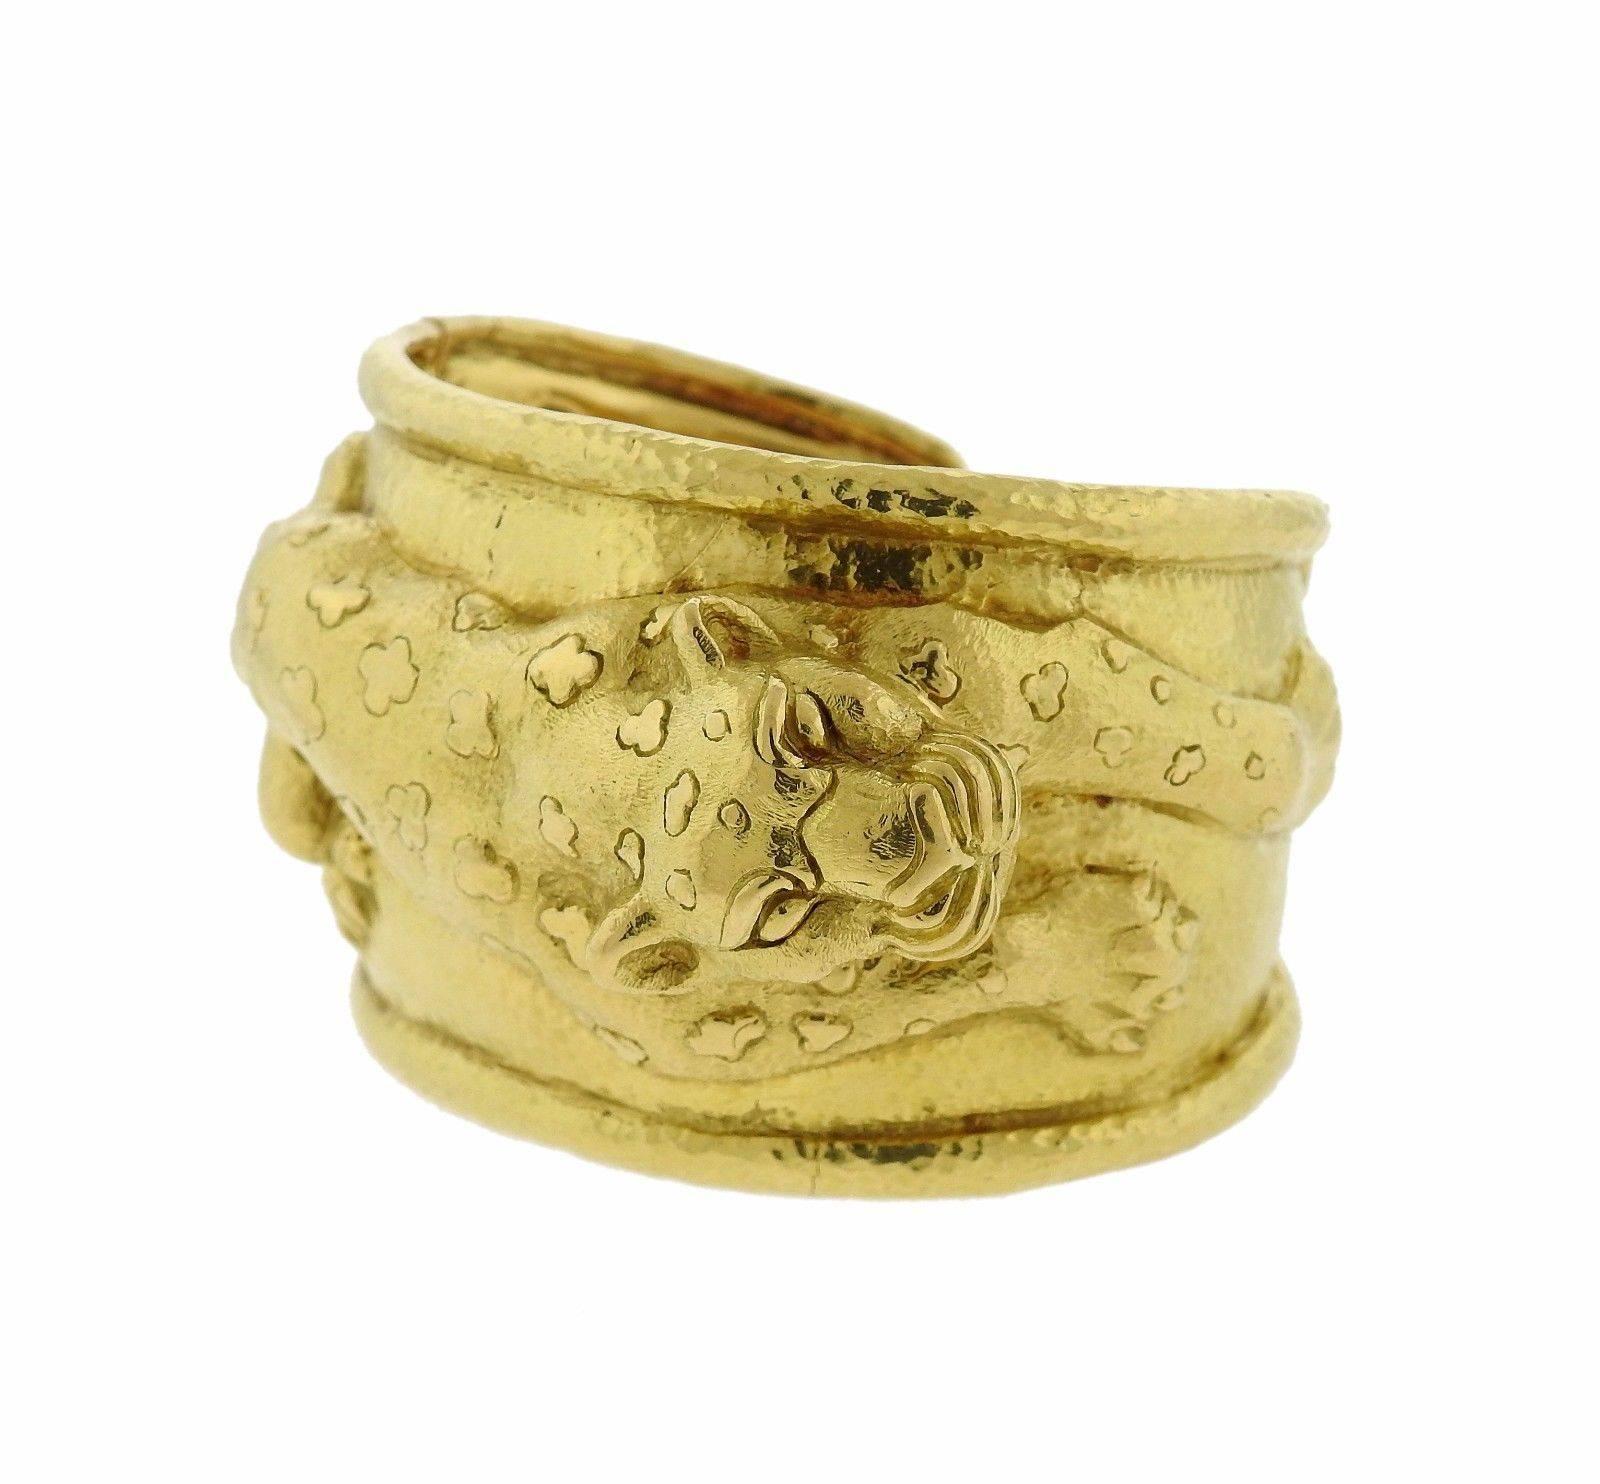 An 18k yellow gold bracelet depicting a leopard.  The bracelet will fit up to 7 1/2